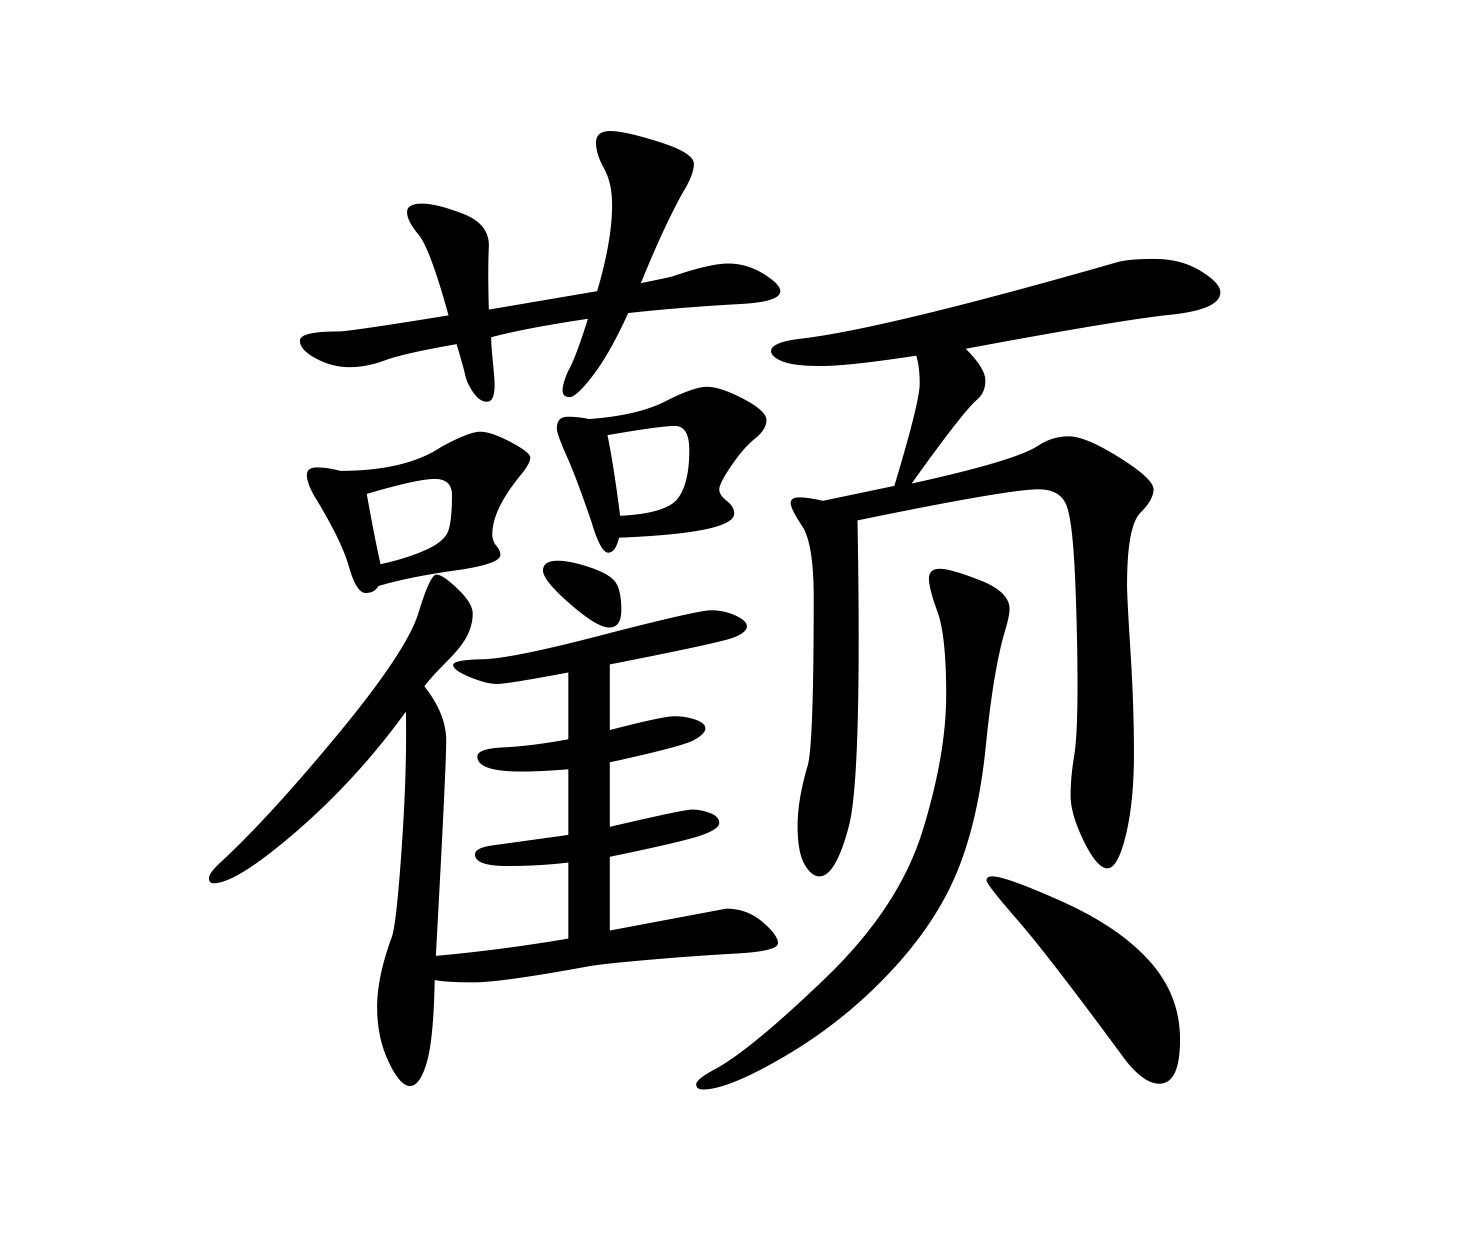 Forever a student: The most complex Chinese character